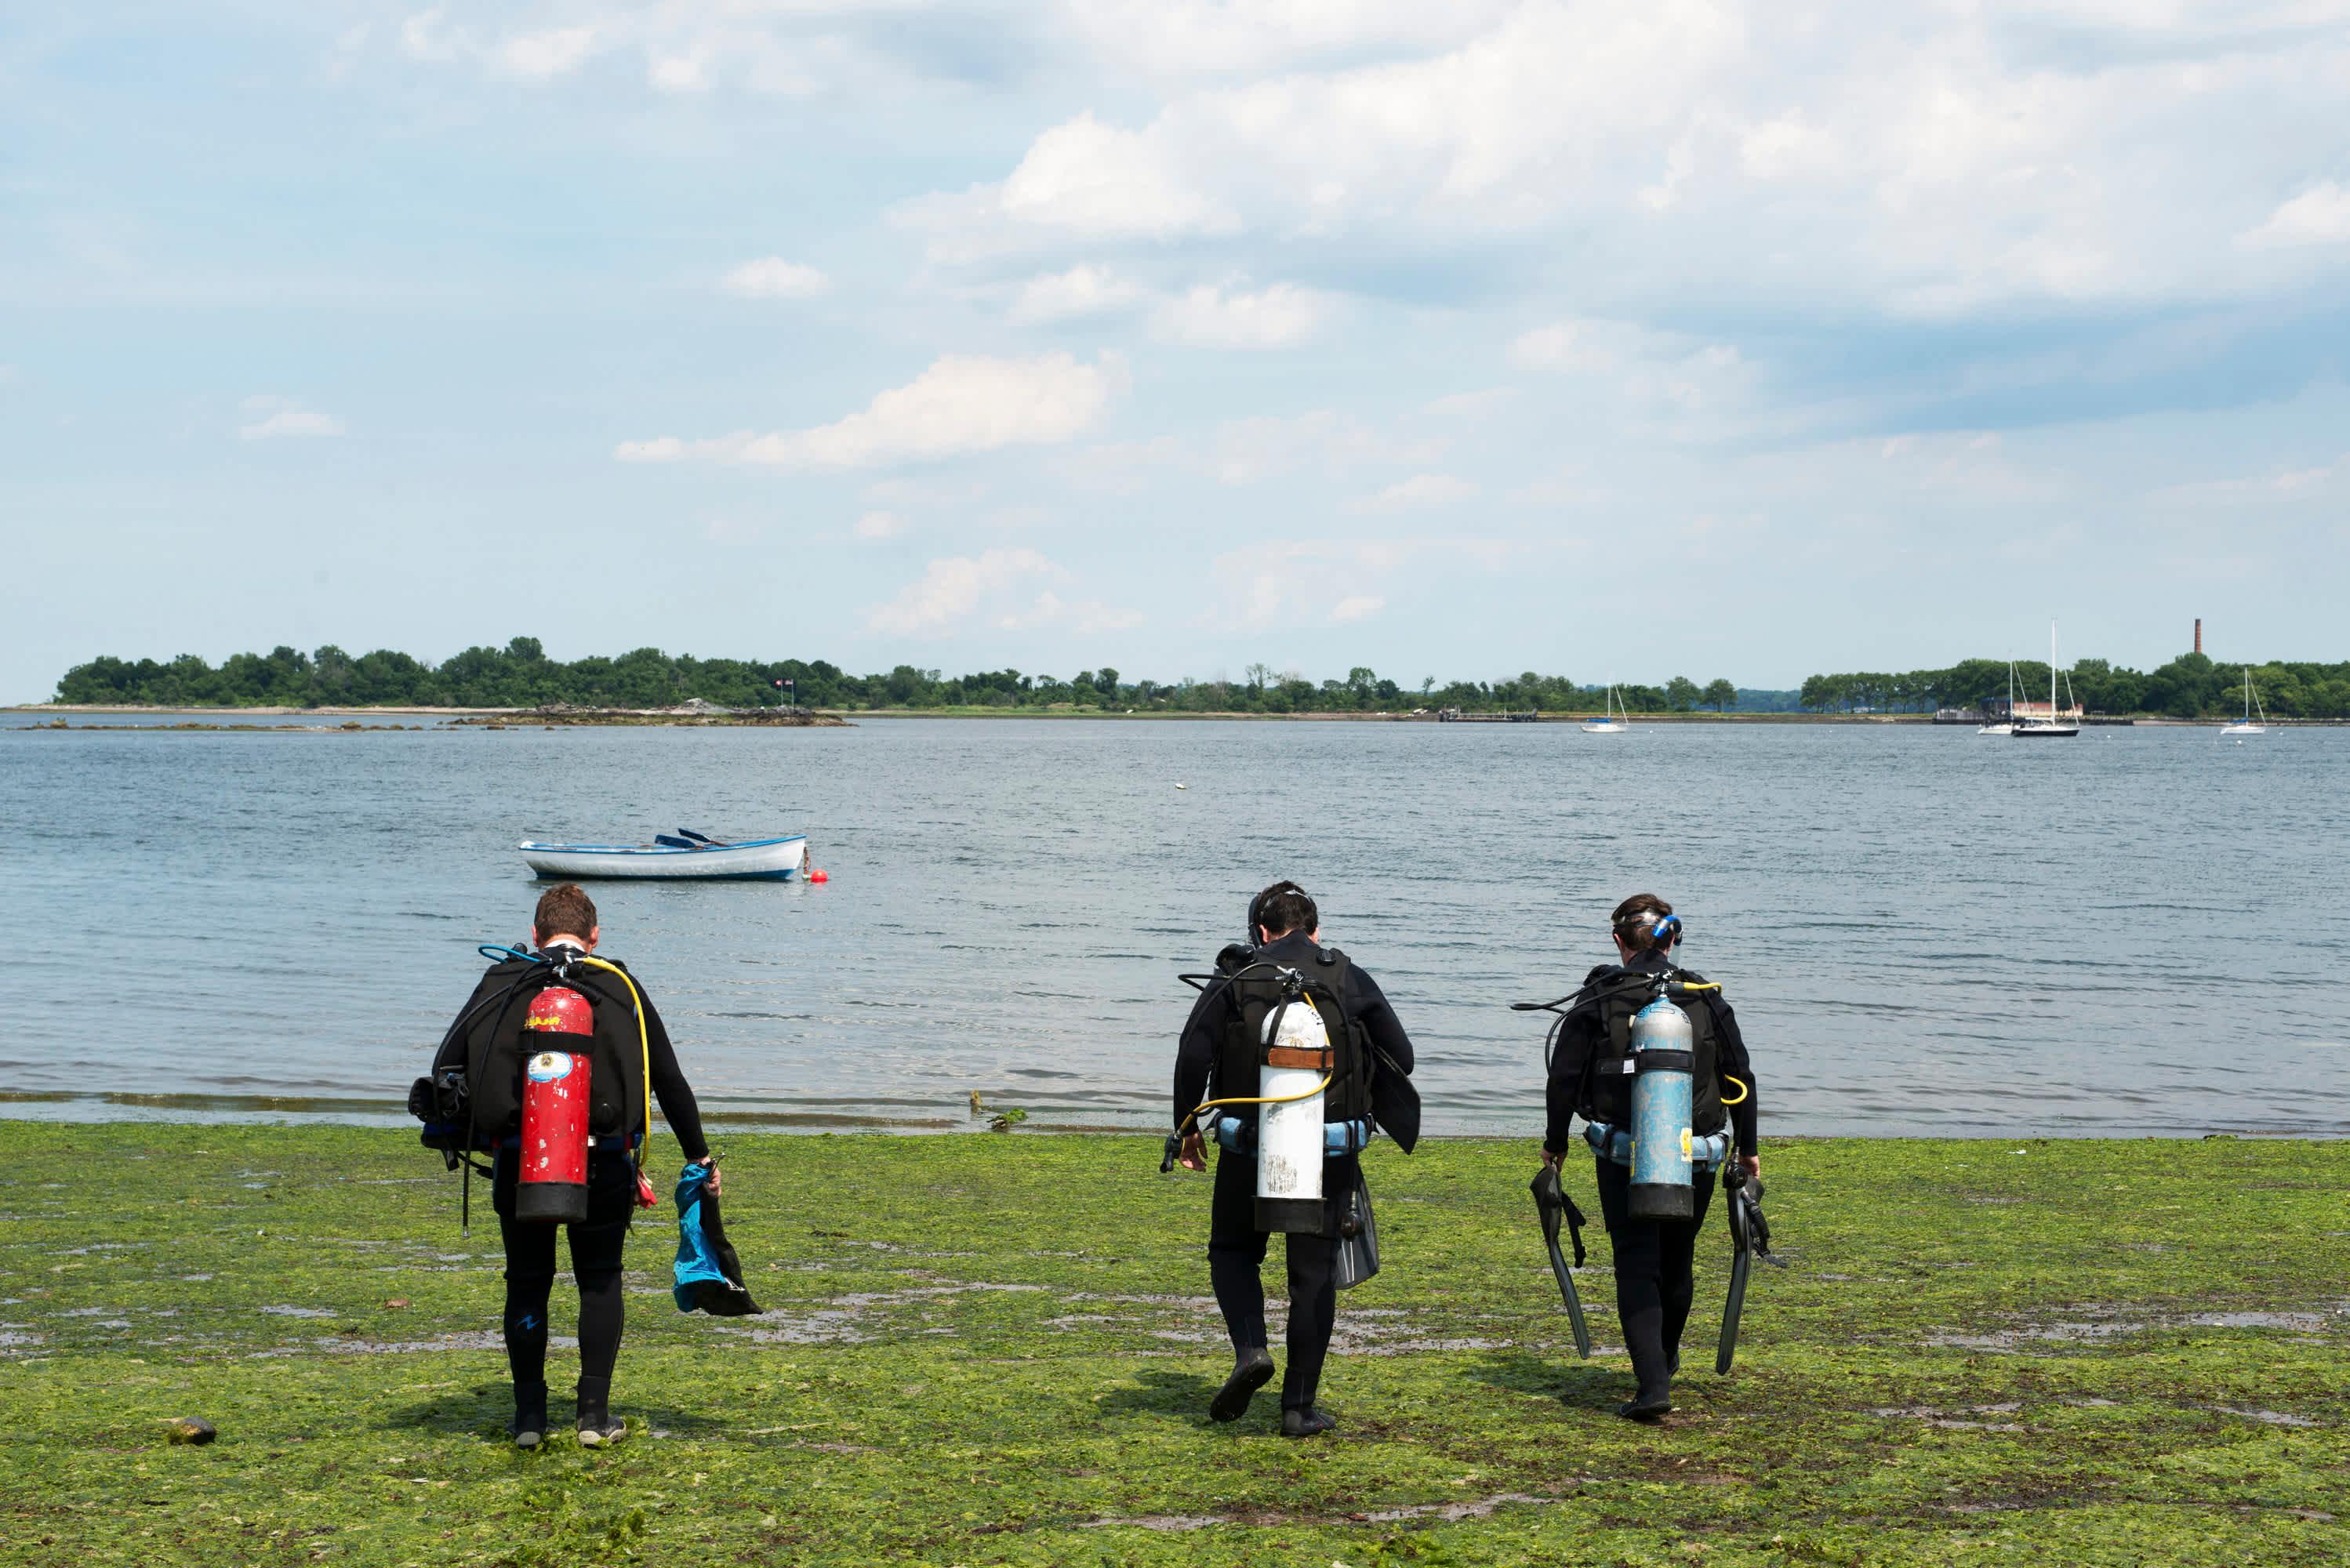 Divers walking to the water in City Island, the Bronx